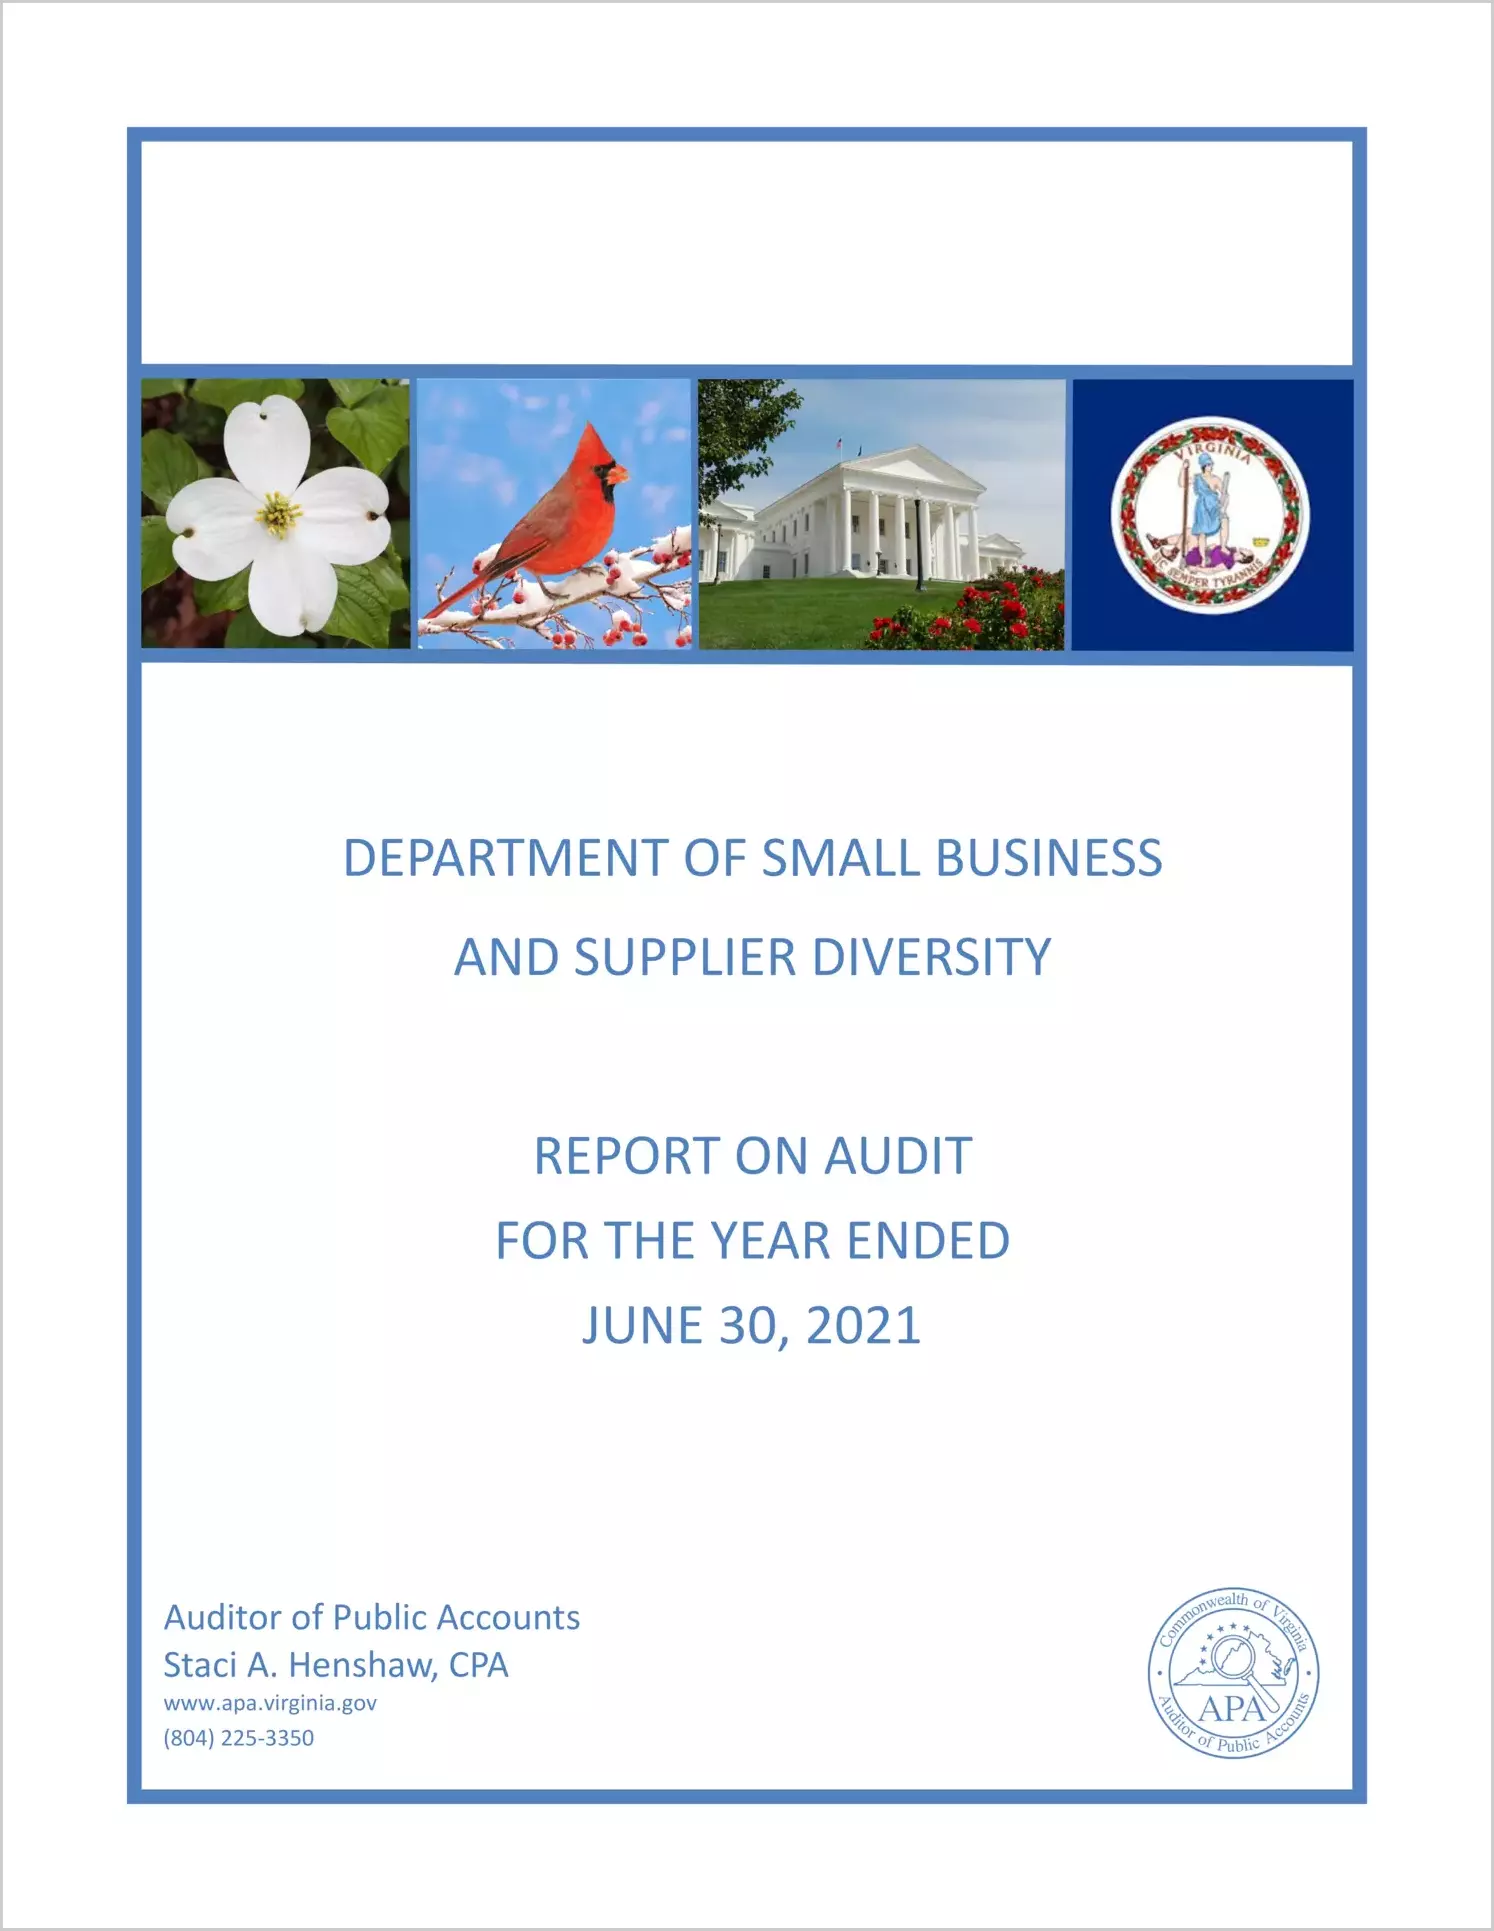 Department of Small Business and Supplier Diversity for the year ended June 30, 2021